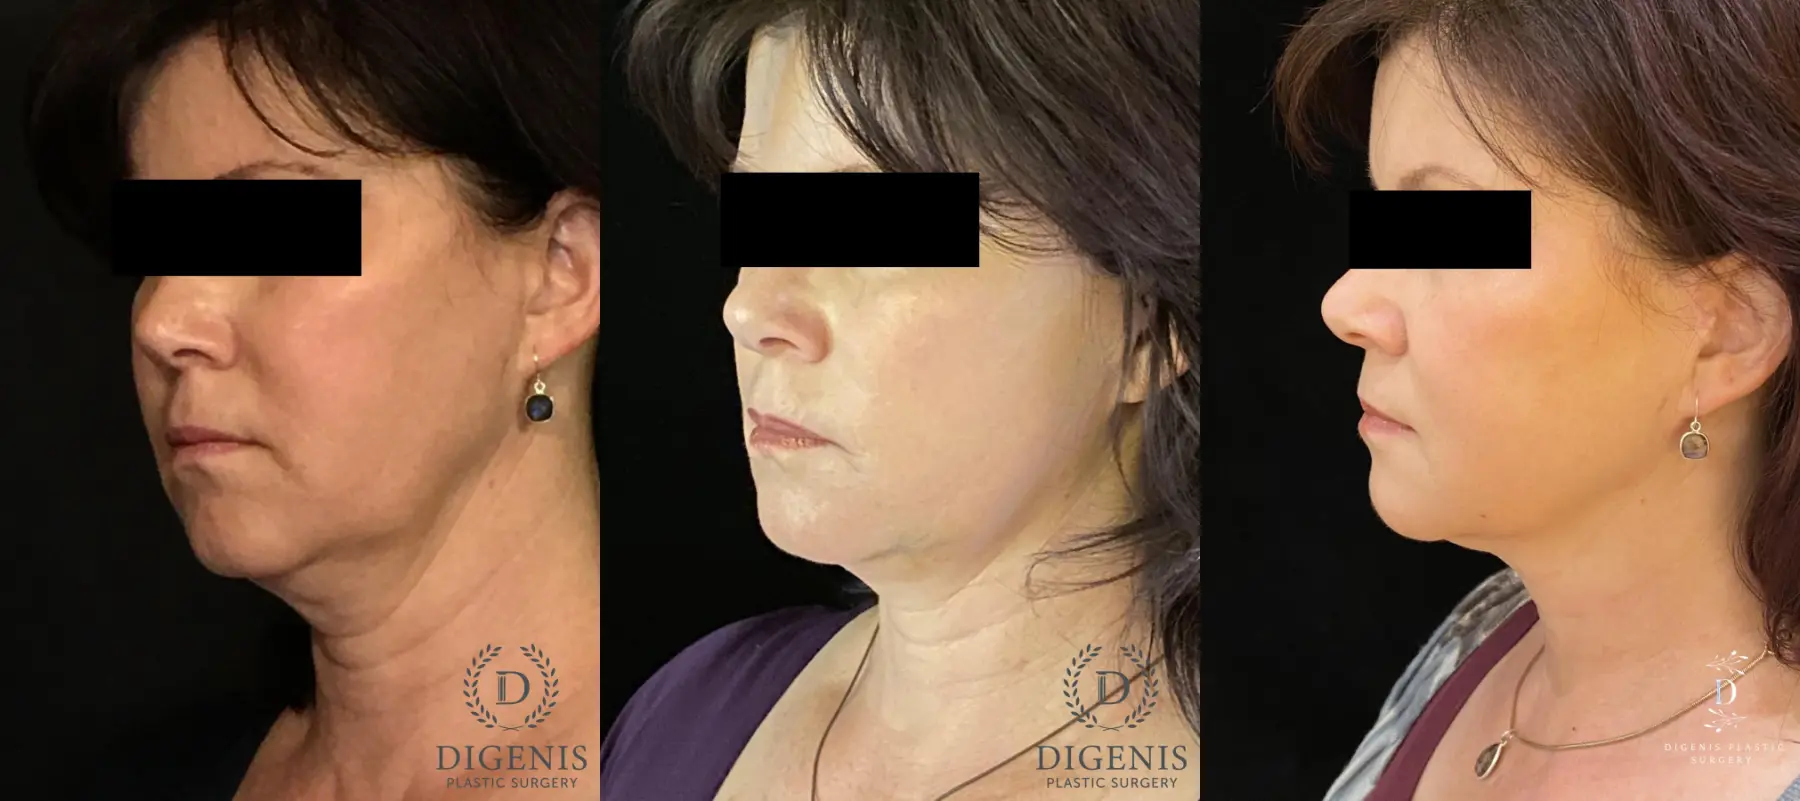 Digenis Refresh Lift: Patient 4 - Before and After 4